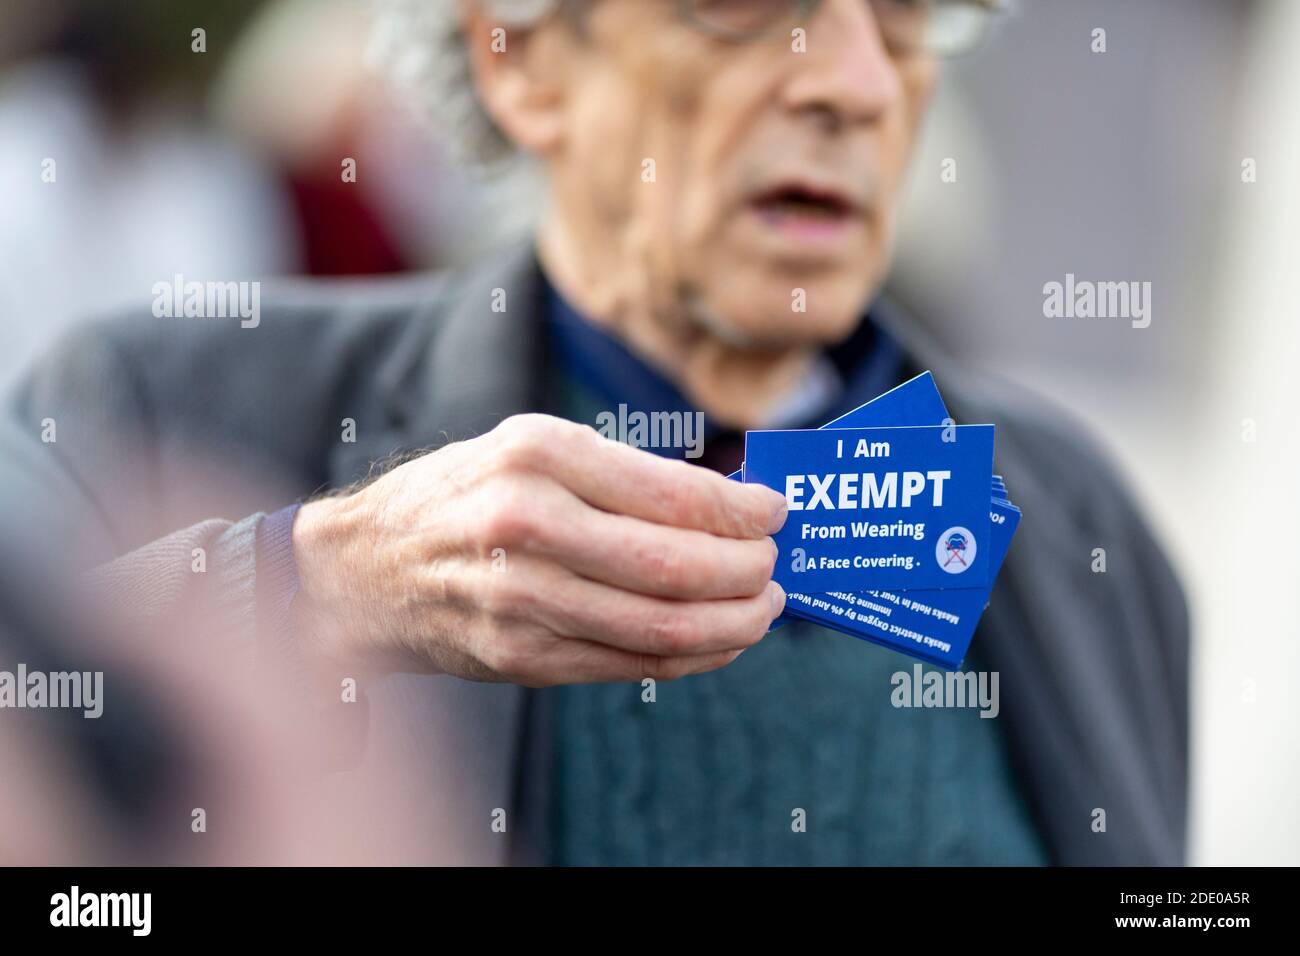 Piers Corbyn holding up a face covering exemption card during anti-vaccination protest, Parliament Square, London, 24 November 2020 Stock Photo